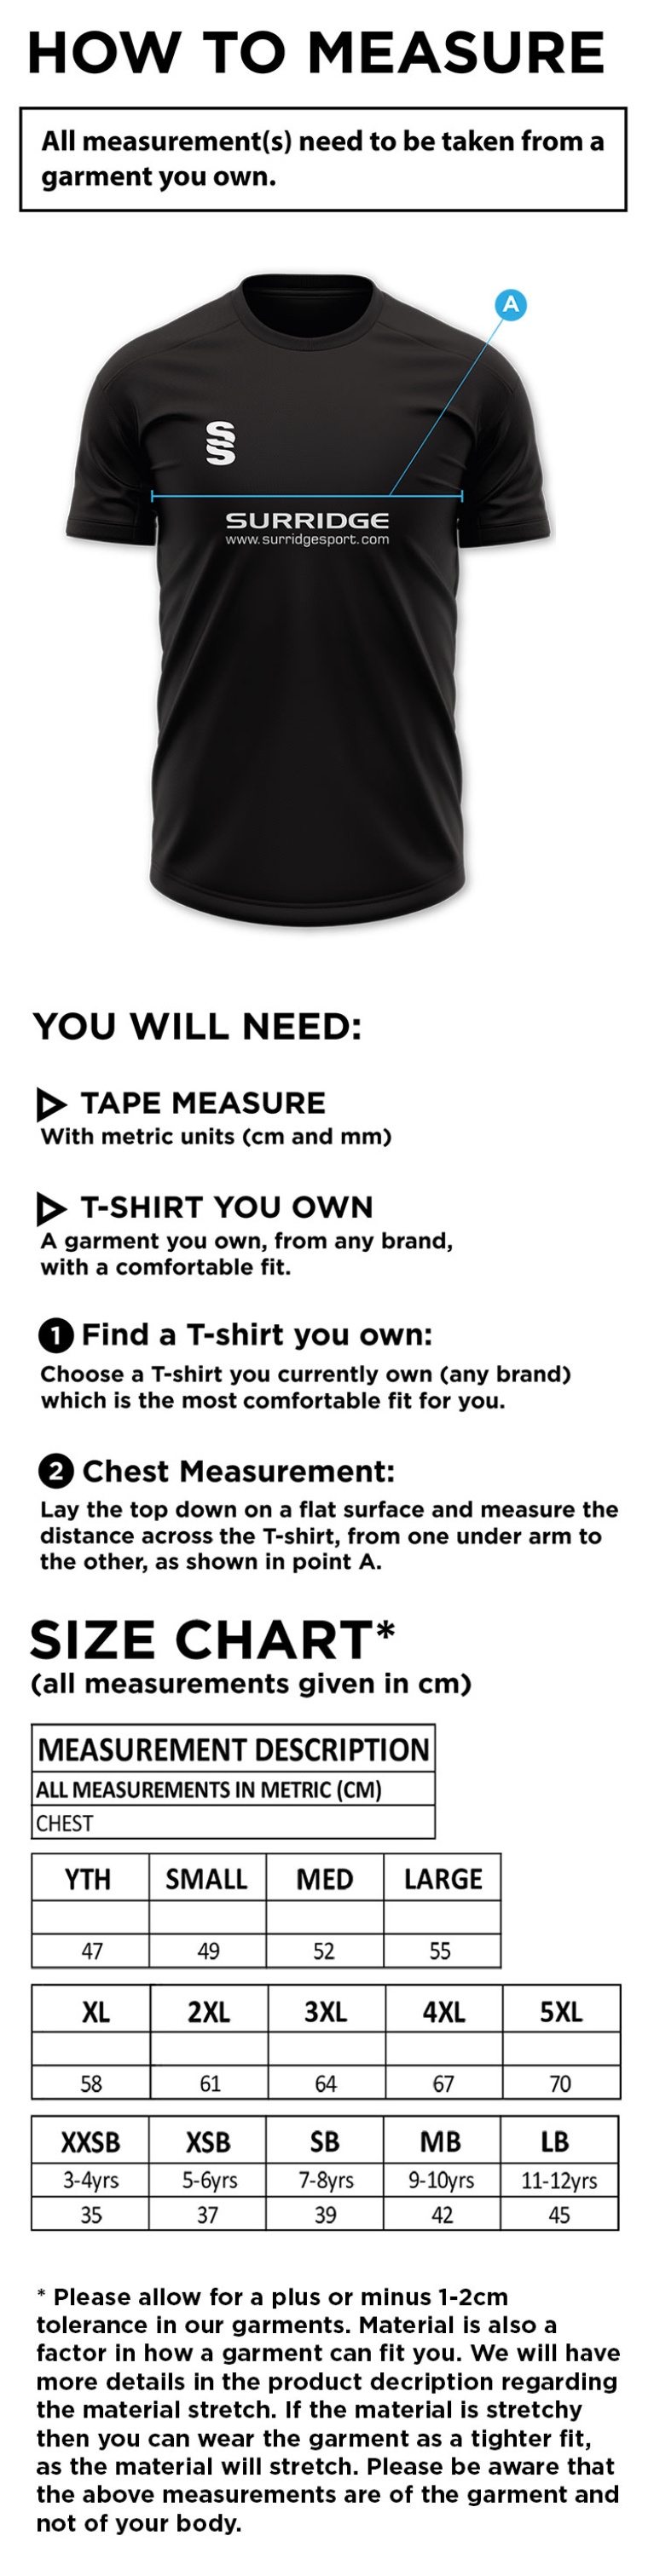 Dual Games Shirt : Bottle (2nd) - Size Guide